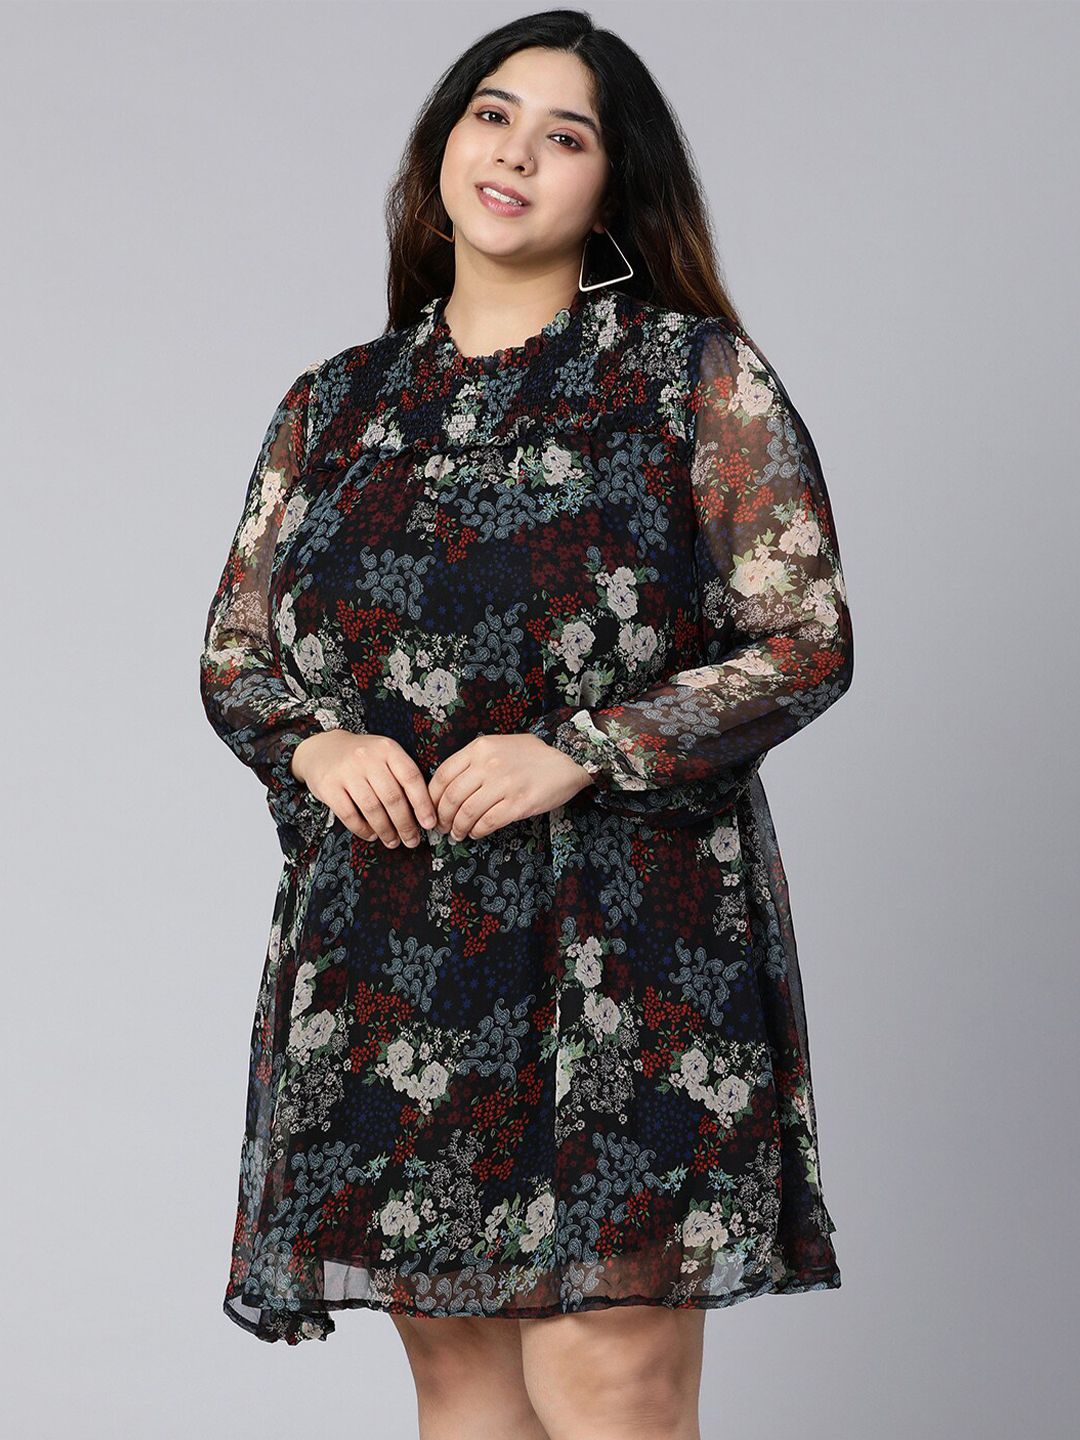 Oxolloxo Women Plus Size Black Floral Satin A-Line Dress Price in India